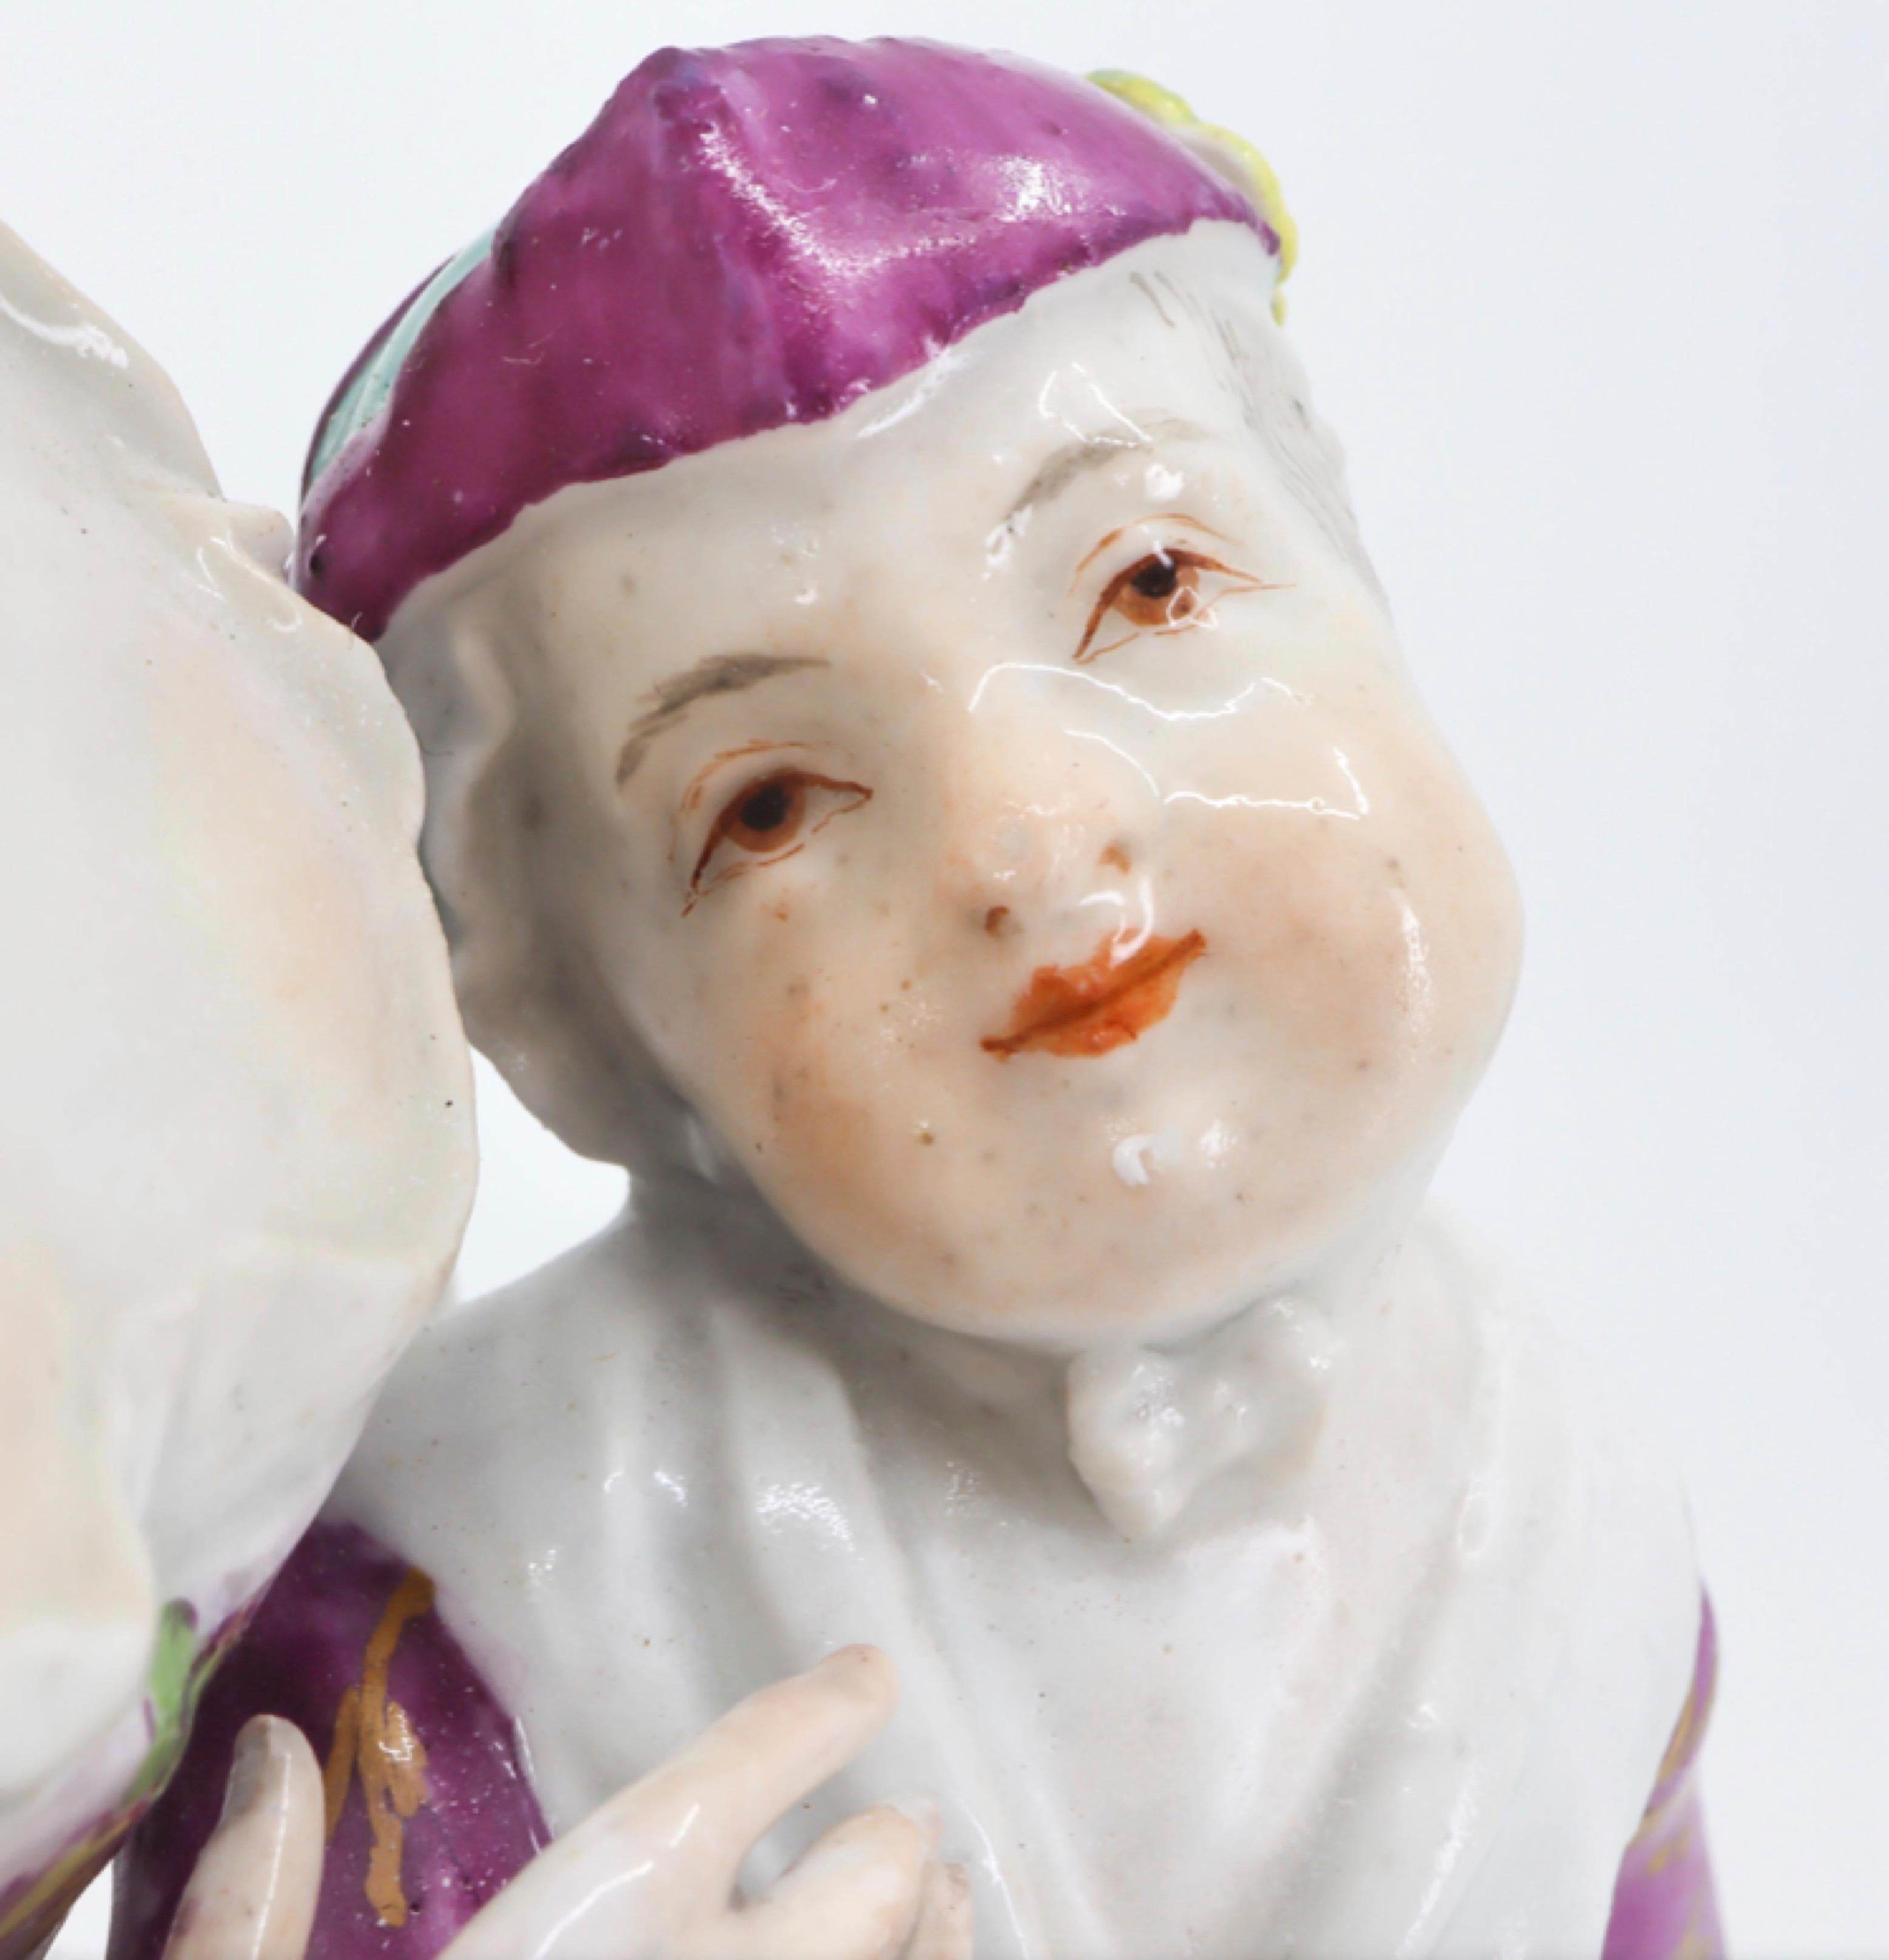 German Porcelain Figurine of Mother and Childrens, Hand Painted, 18th Century, Meissen For Sale